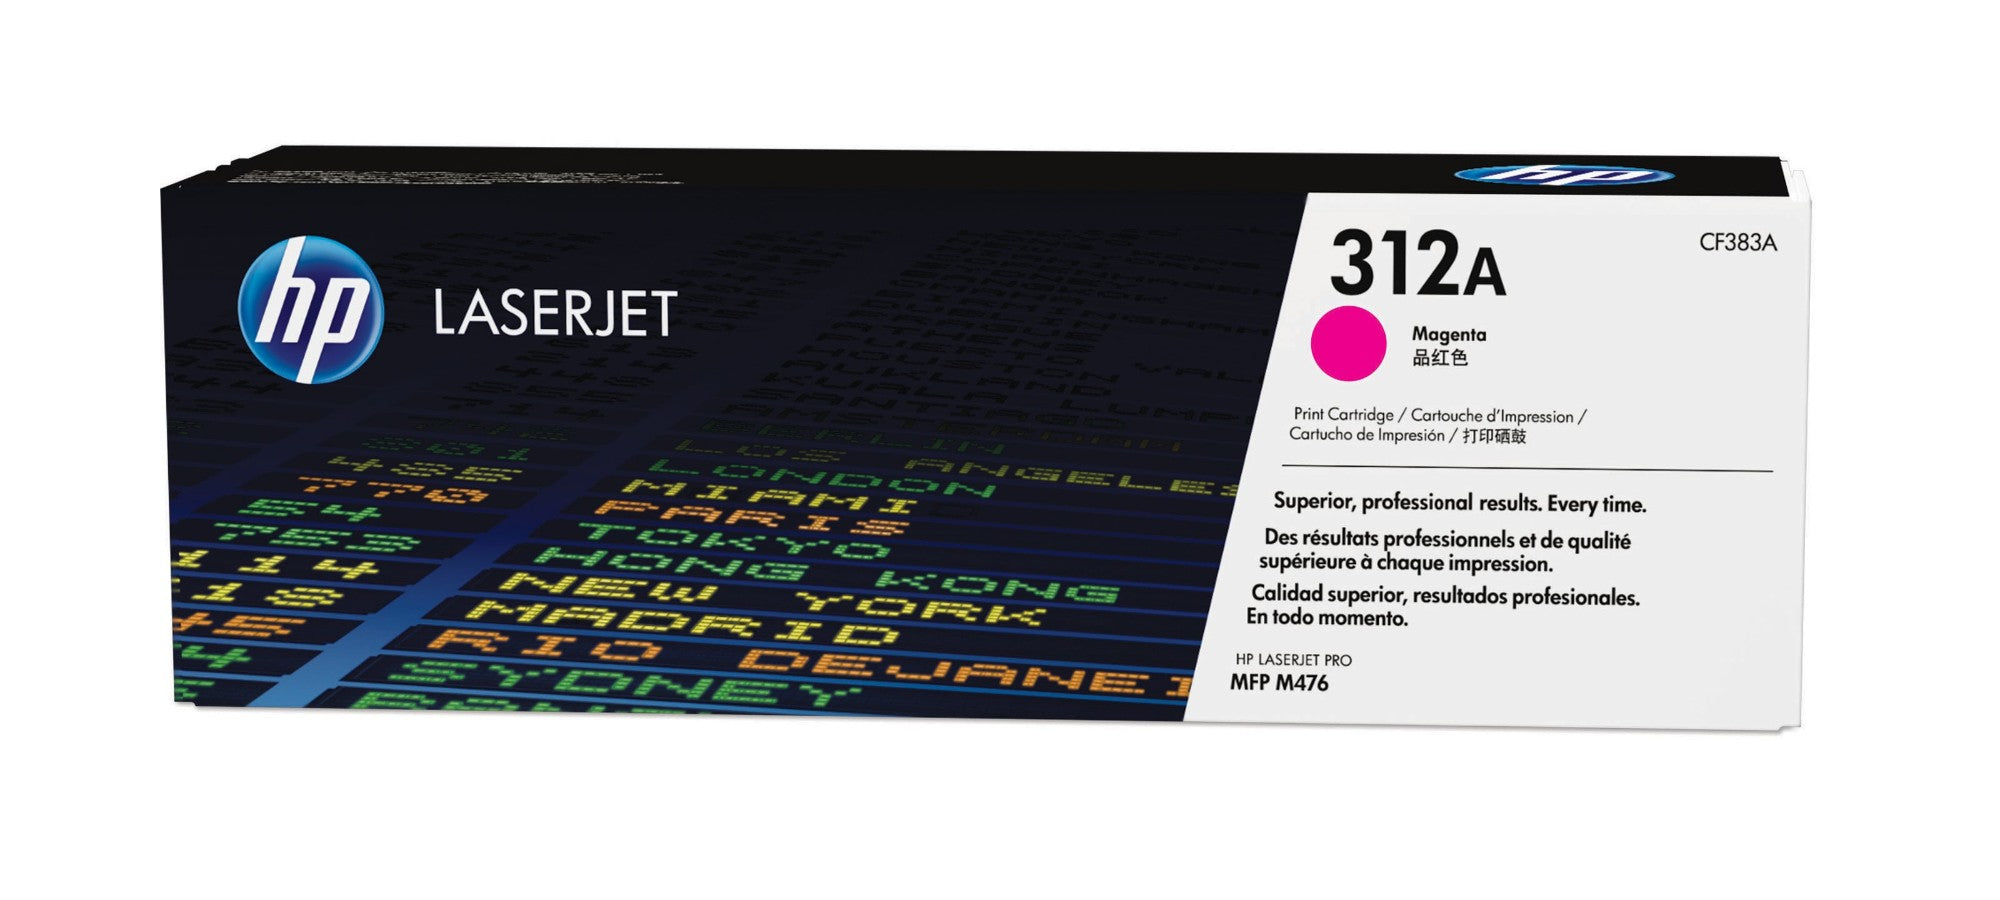 HP CF383A/312A Toner cartridge magenta, 2.7K pages ISO/IEC 19798 for HP CLJ Pro M 476